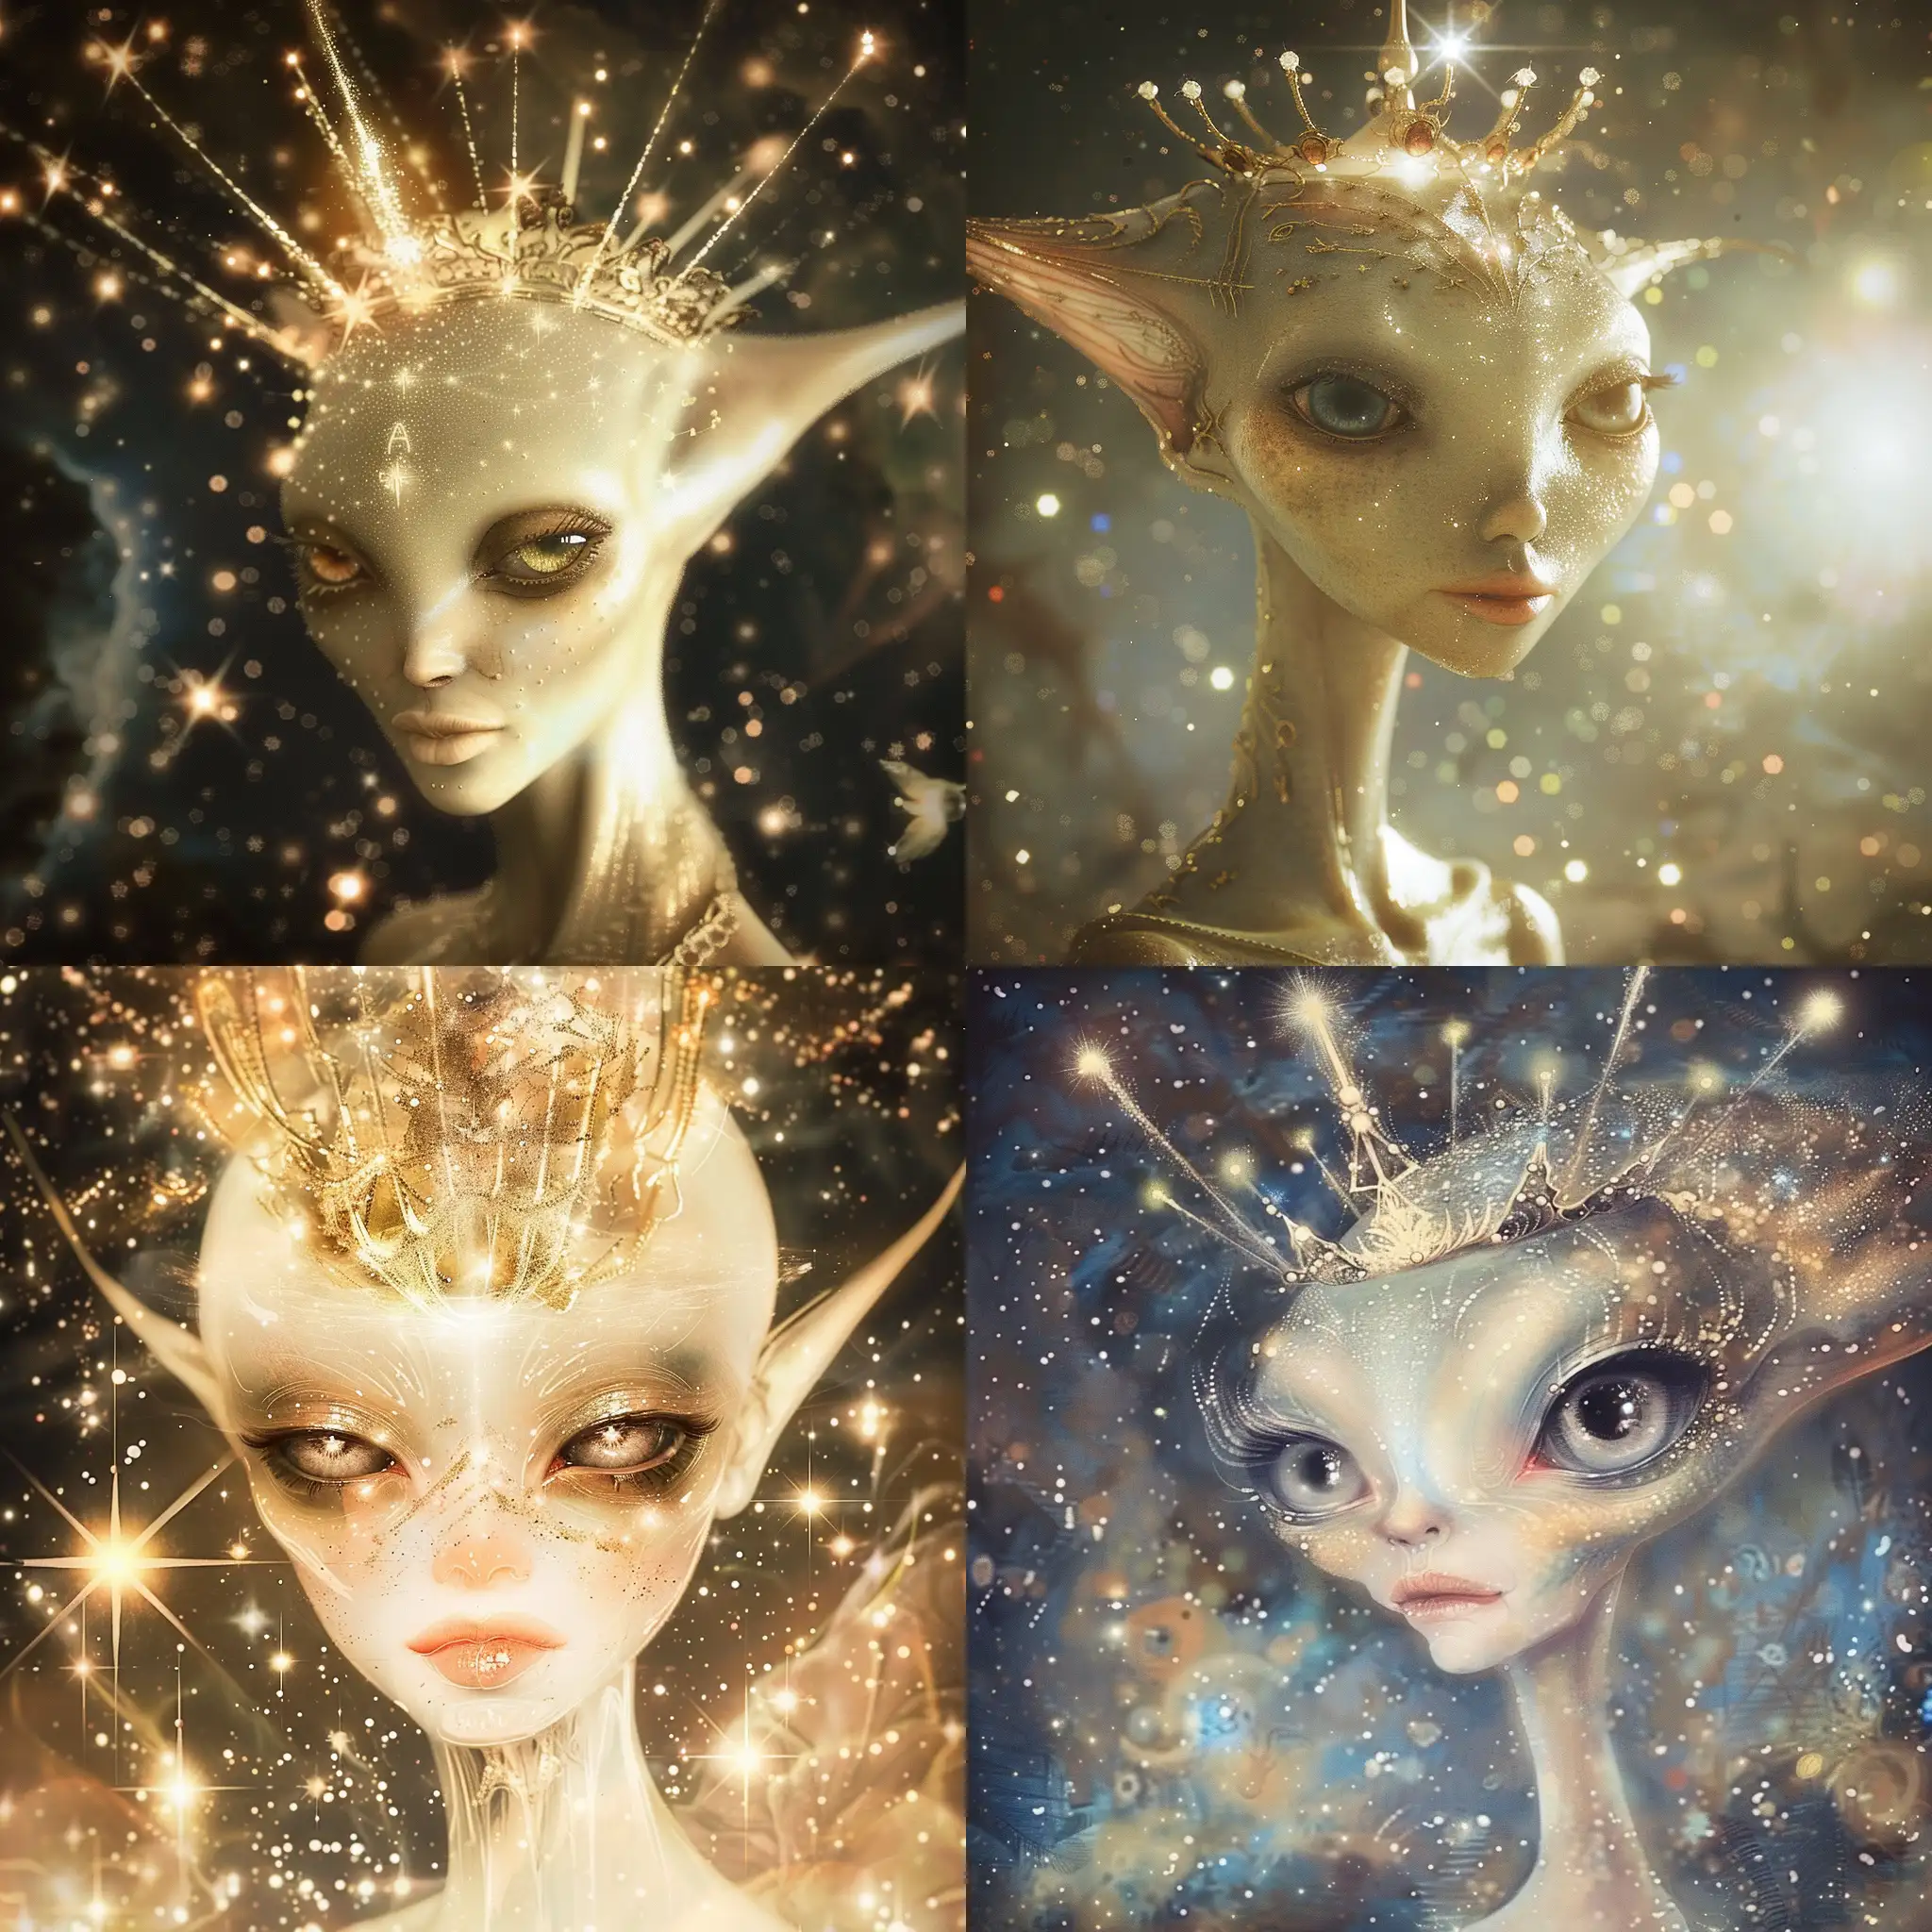 KindEyed-Alien-King-with-Crown-of-Pure-Light-in-Starry-Ethereal-Fantasy-Setting